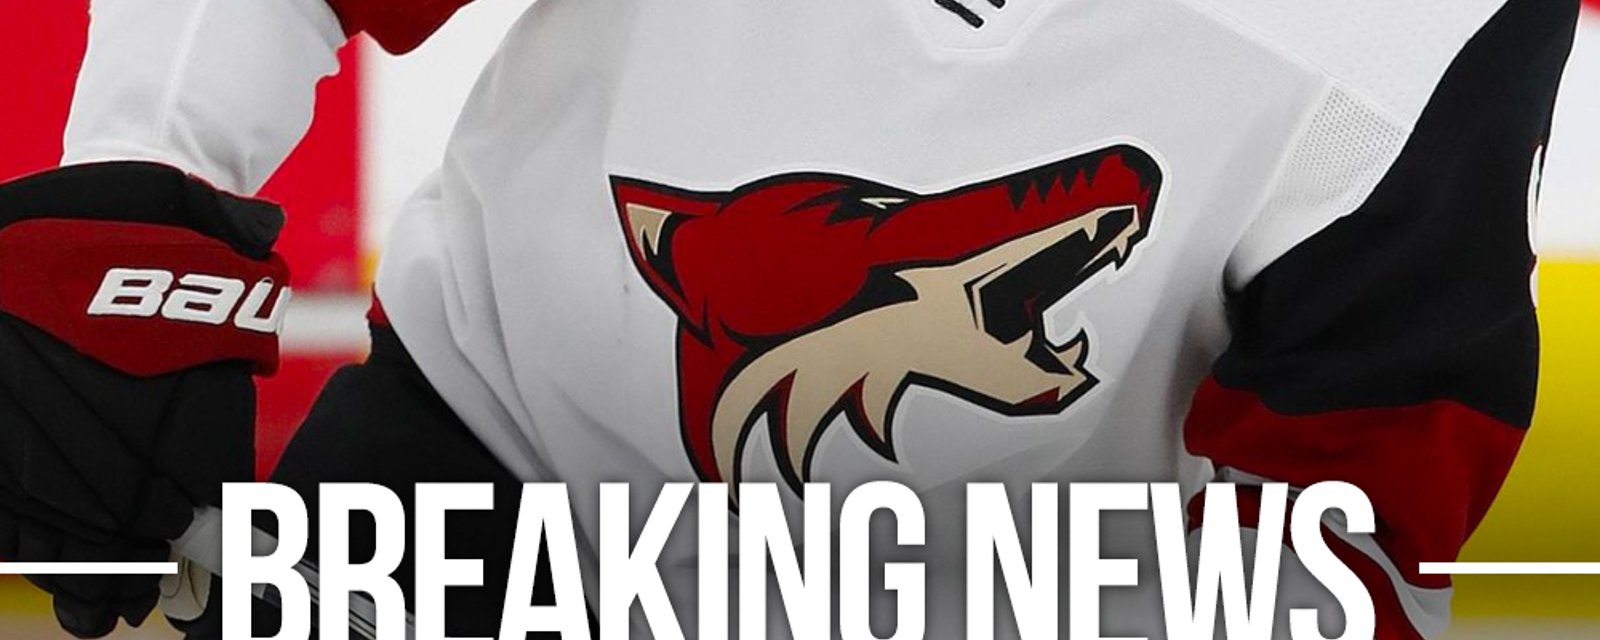 More financial trouble for Coyotes, reports of more unpaid bills